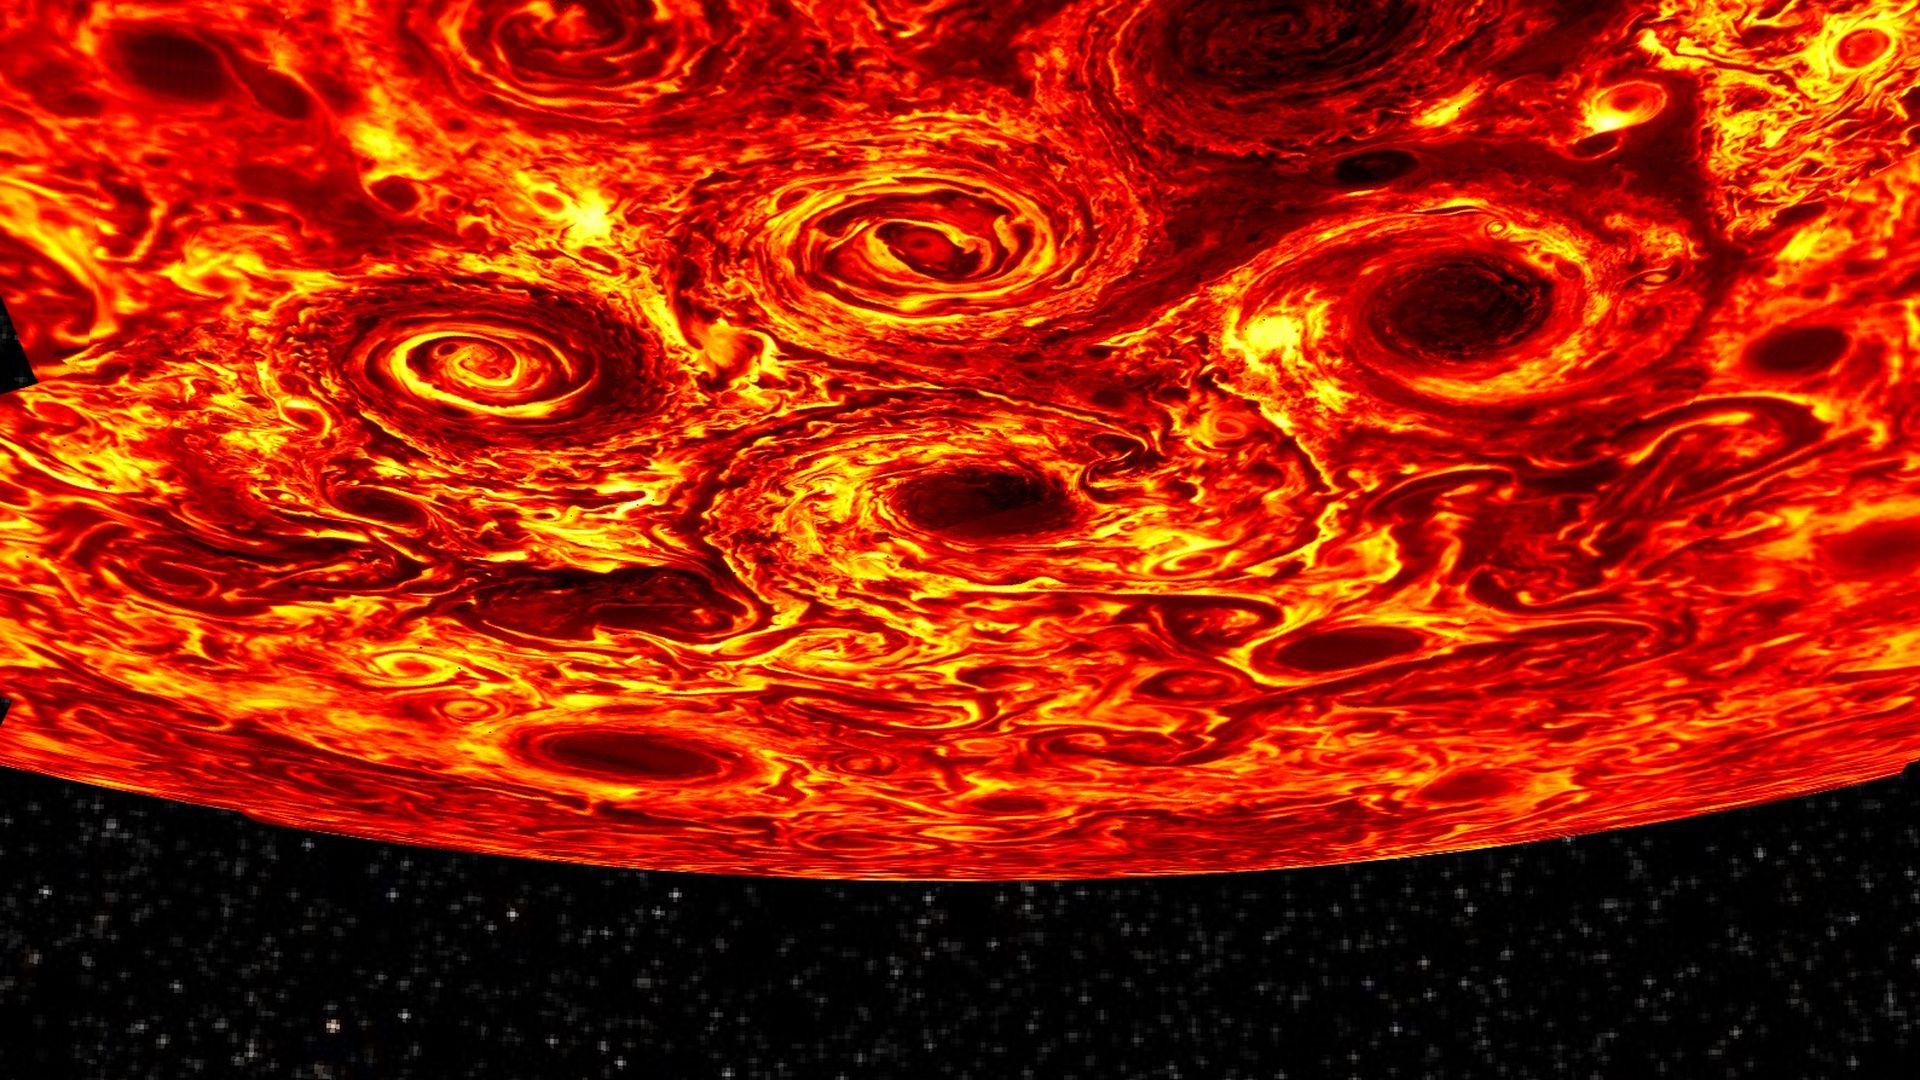 Heat radiating from cyclones on Jupiter's South Pole.